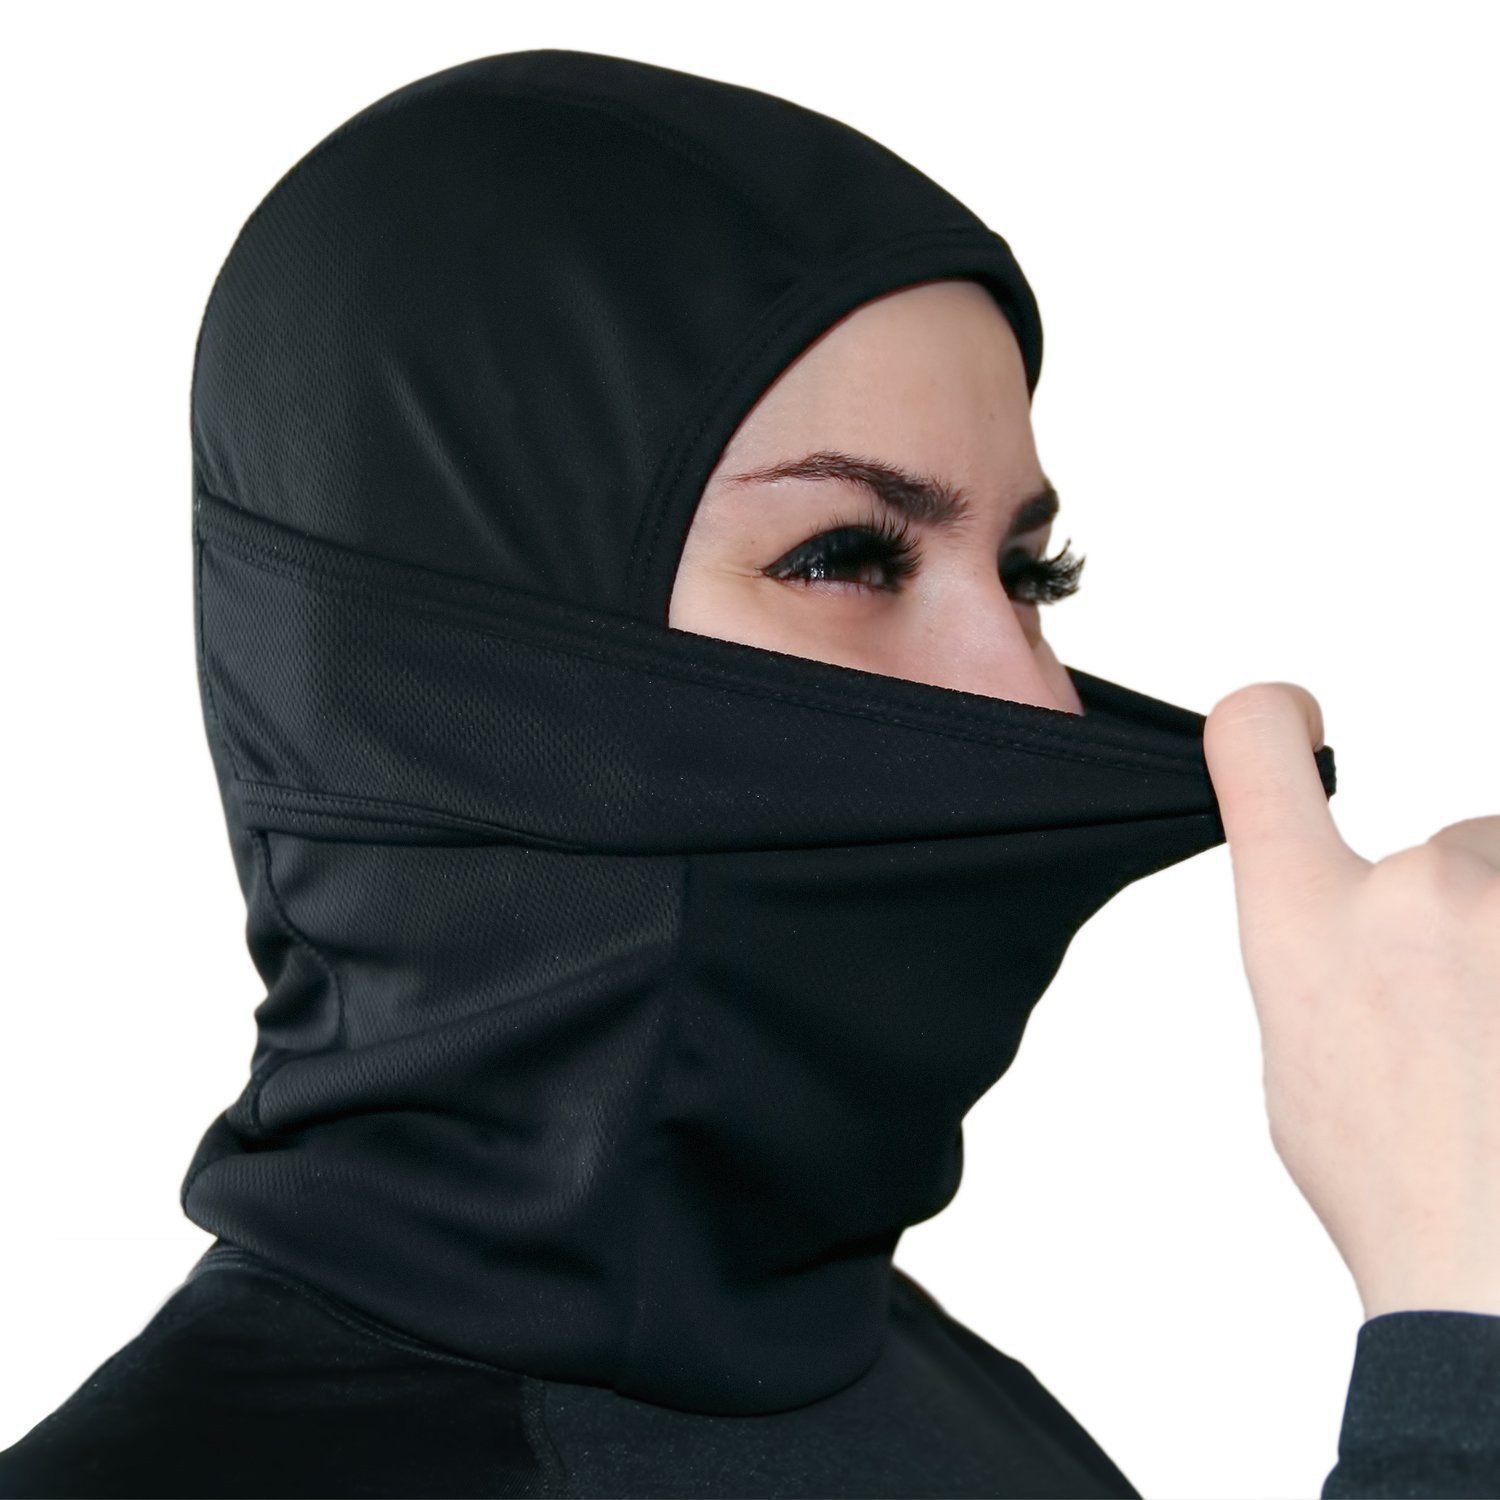 Ultimate-Thermal-Retention-Windproof-Ski-Tactical-Mask-Cold-Weather-Face-Mask-Neck-Warmer-1241597-3